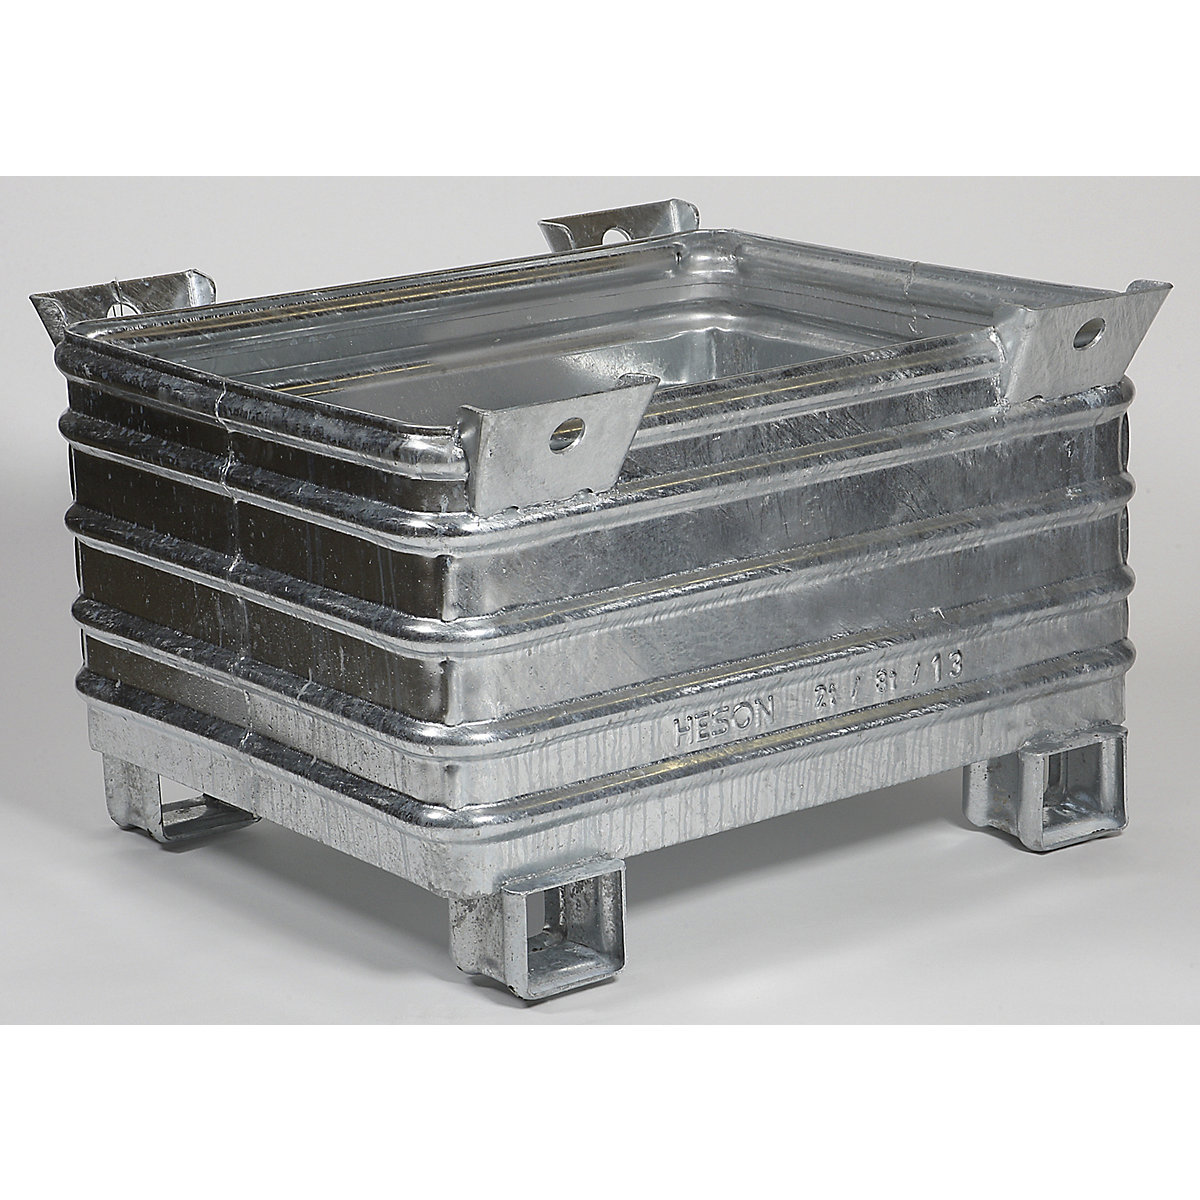 Heavy duty box pallet – Heson, WxL 800 x 1000 mm, with U-shaped feet, hot dip galvanised, 10+ items-4